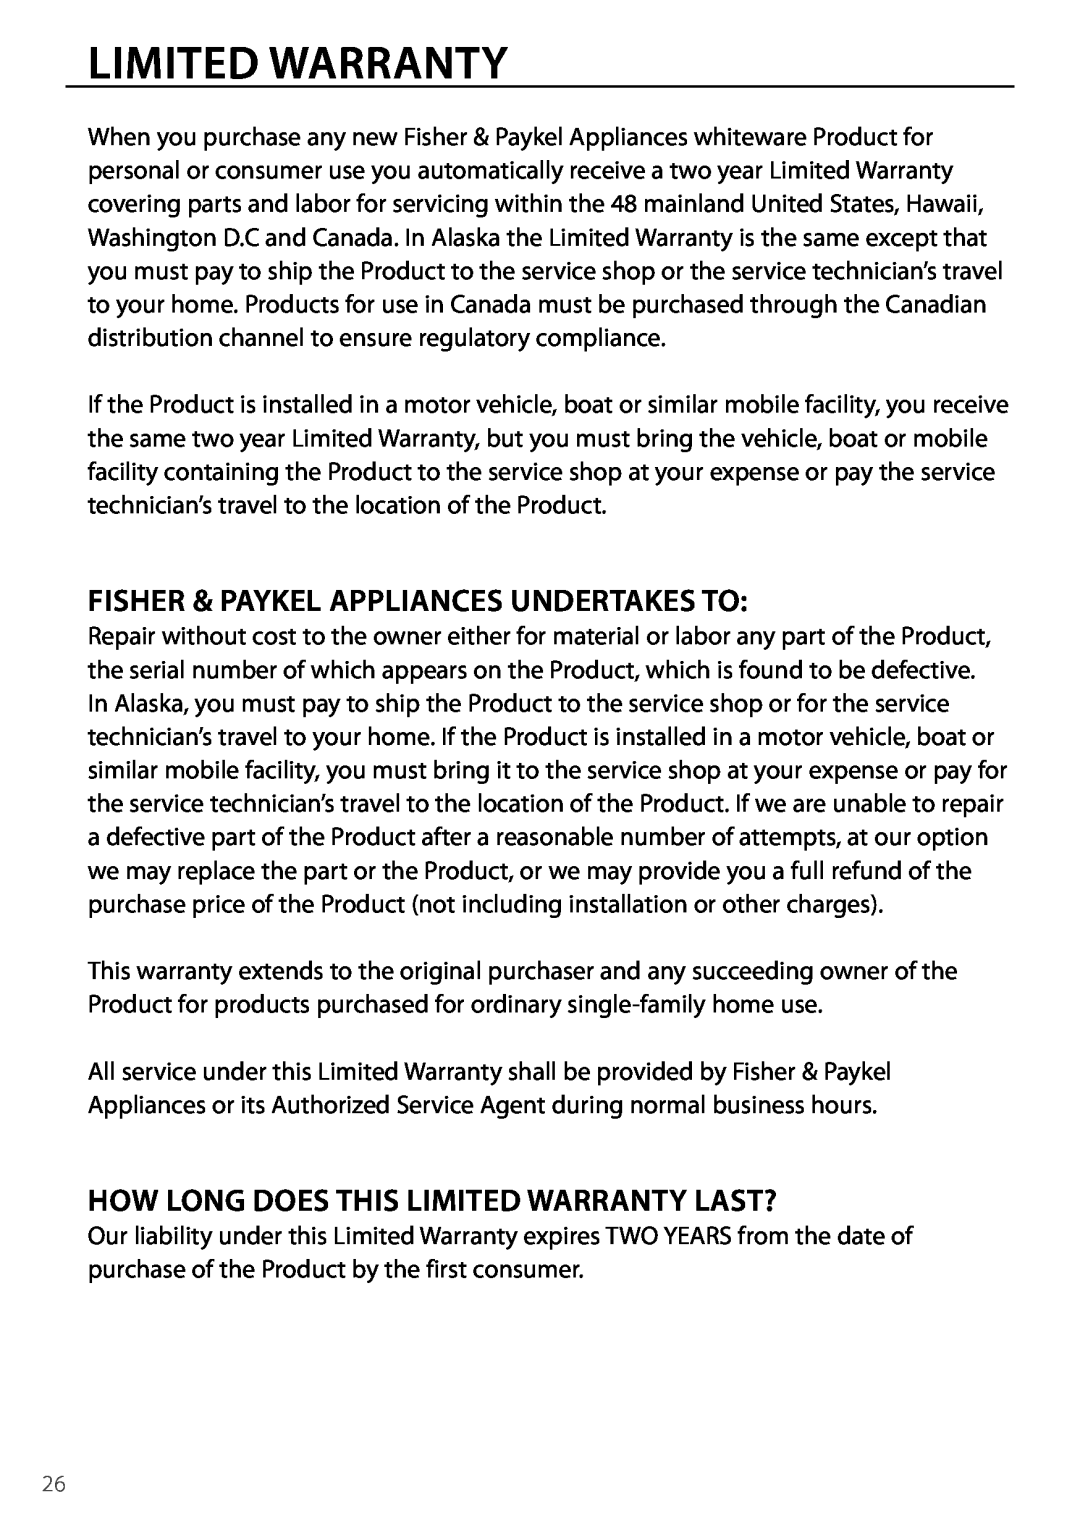 DCS DD224, DD124 manual Fisher & Paykel Appliances Undertakes To, How Long Does This Limited Warranty Last? 